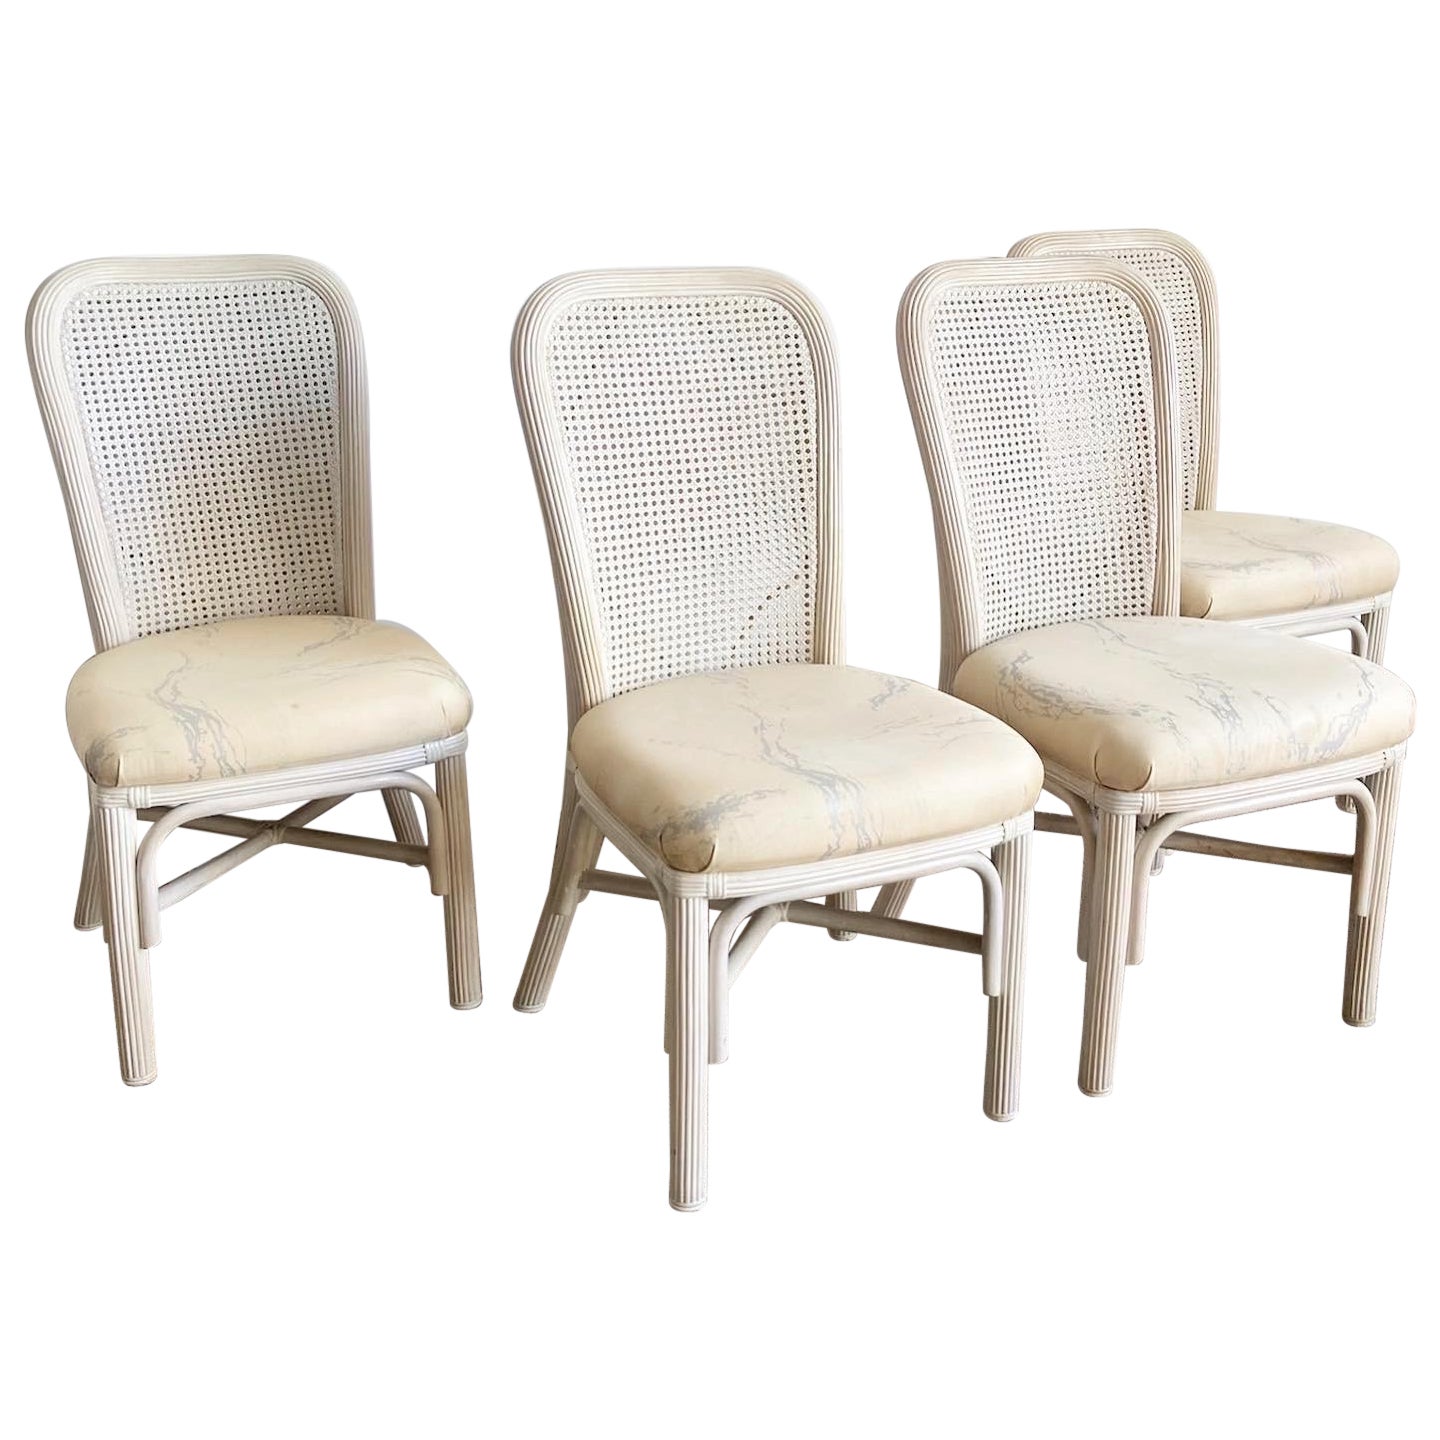 Boho Chic Pencil Reed Cane Back Dining Chairs - Set of 4